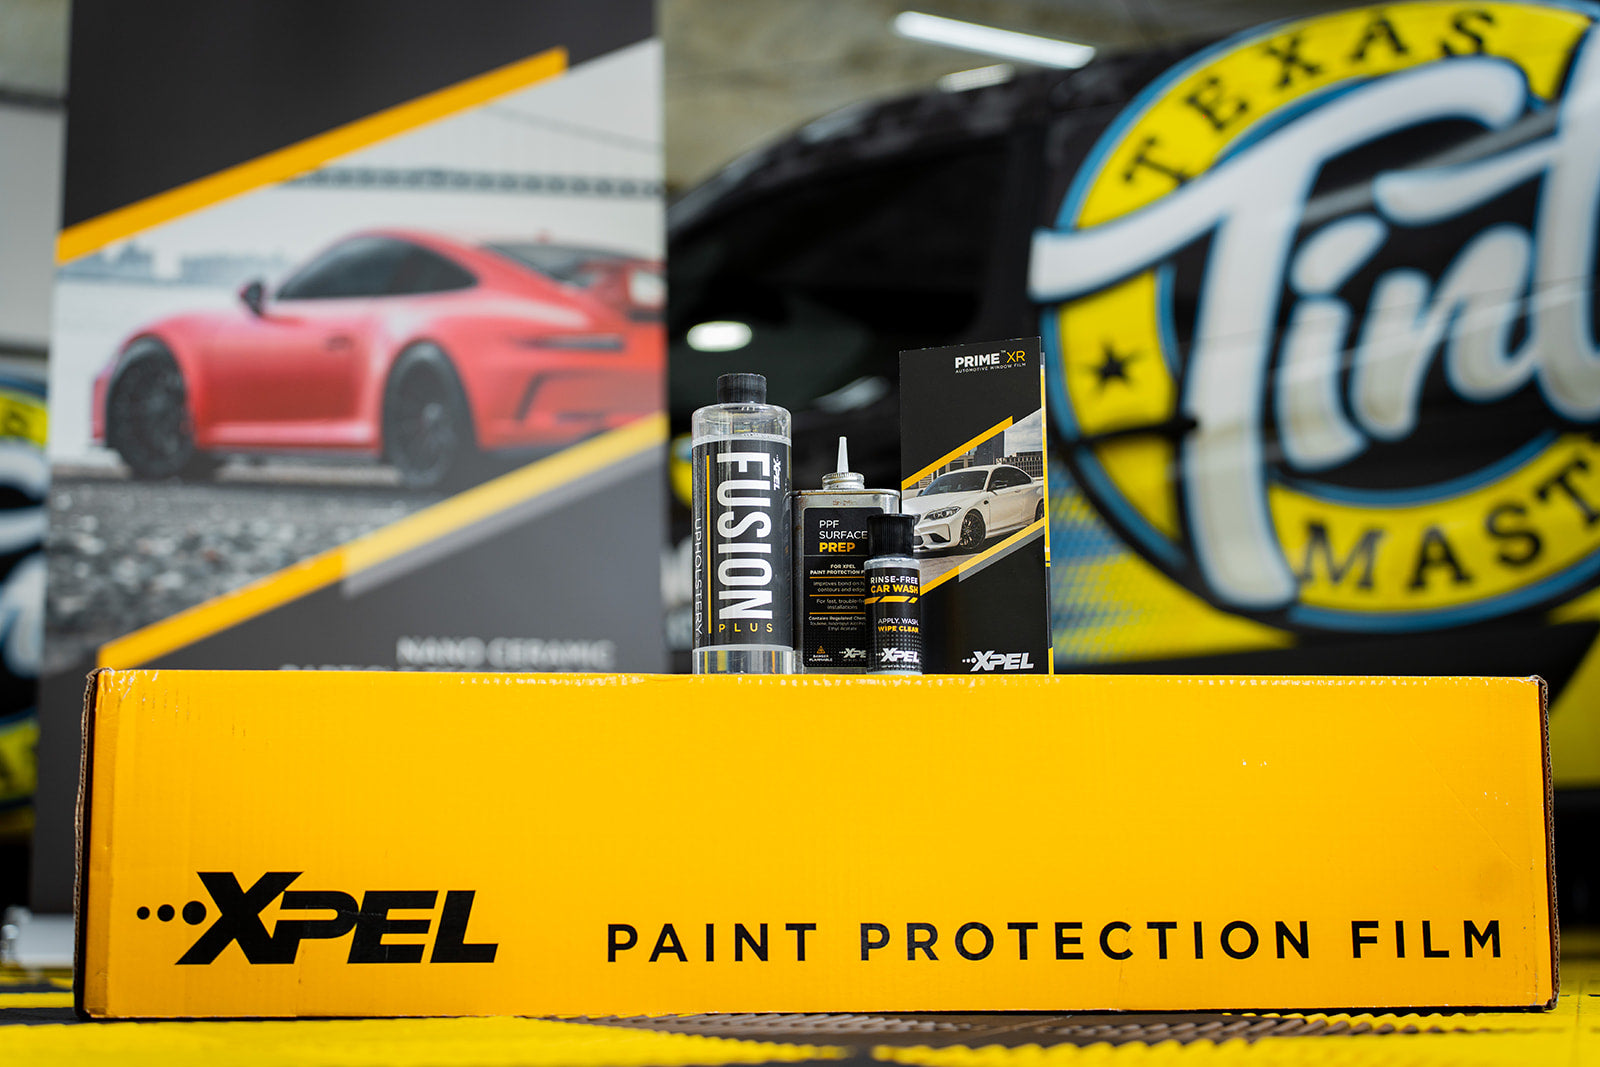 XPEL Paint Protection Film/Window Film